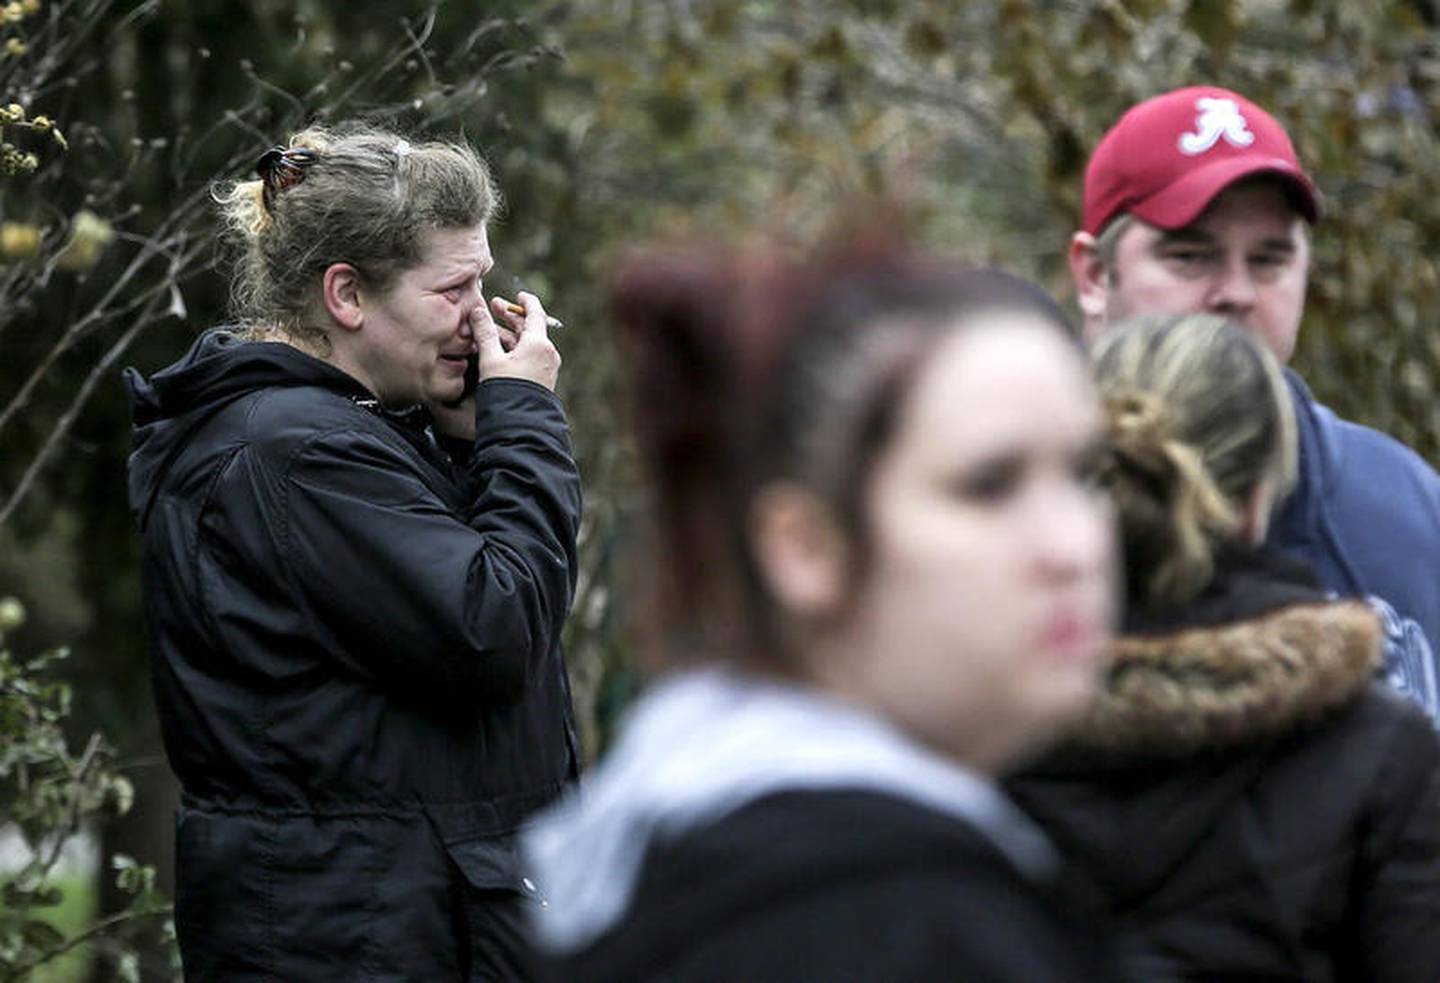 Friends of Kaitlyn Kearns, a 24-year-old bartender from Joliet, cry Nov. 16, 2017, along East Washington Street as county investigators search the clubhouse belonging to the Outlaws in Joliet, Ill. Kearns' body was found Thursday in a rural area of Kankakee County, according to a sheriff’s office news release.